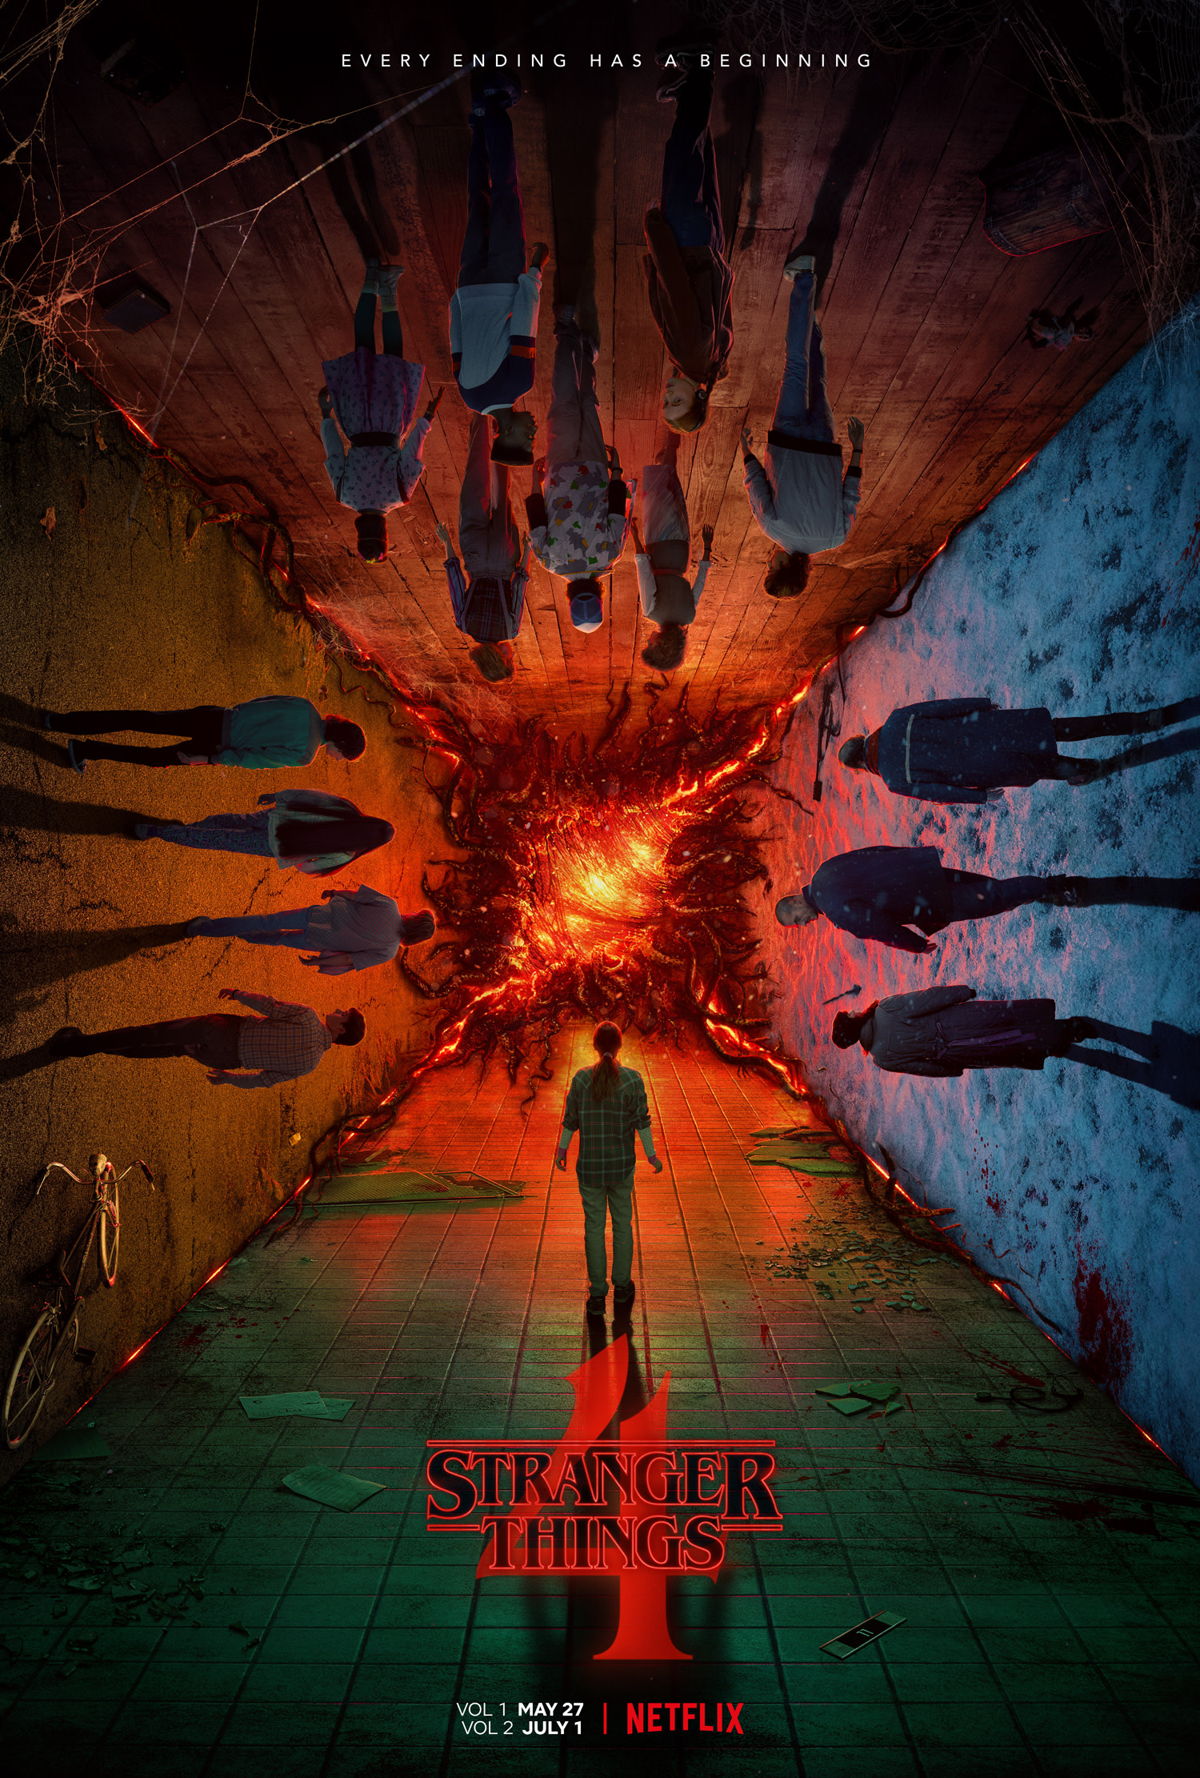 Netflix goes the extra mile for its viewers – the OTT provider is the world’s first to offer AMBEO 2-Channel Spatial Audio to its customers. The first title to benefit from this enhanced spatial audio experience is Season 4 of Stranger Things
Poster courtesy of Netflix